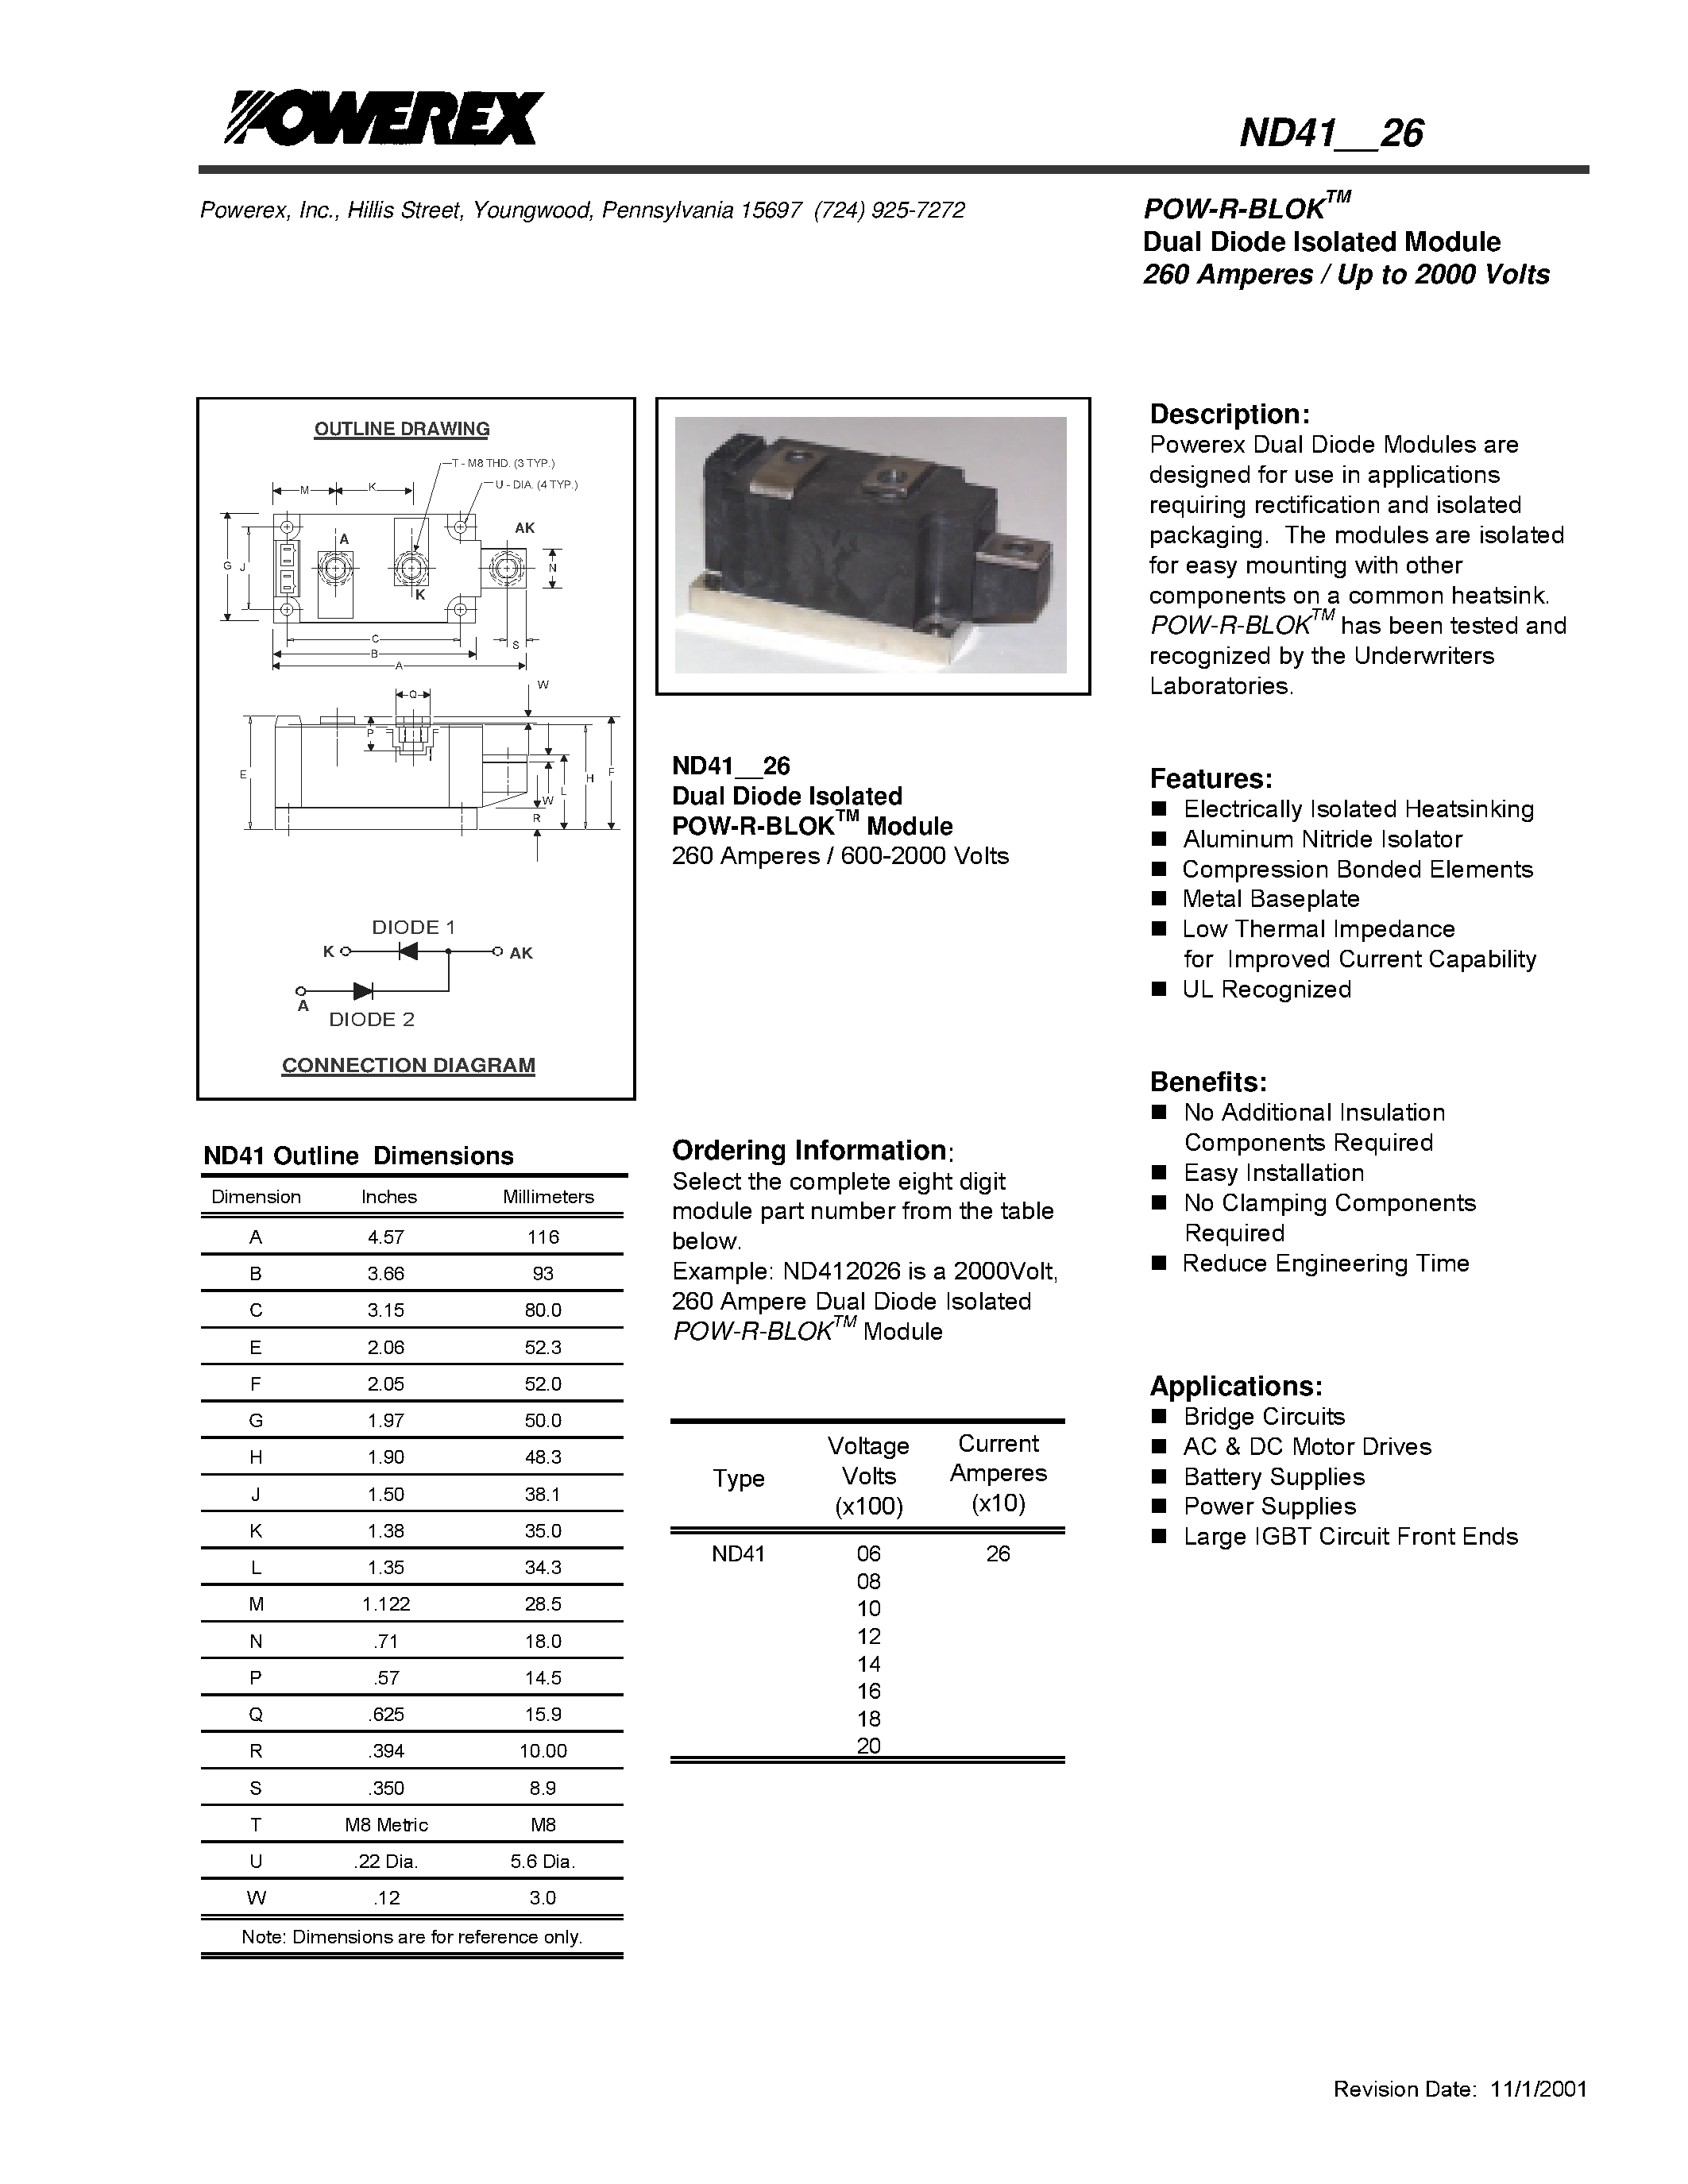 Datasheet ND410626 - POW-R-BLOK Dual Diode Isolated Module (260 Amperes / Up to 2000 Volts) page 1